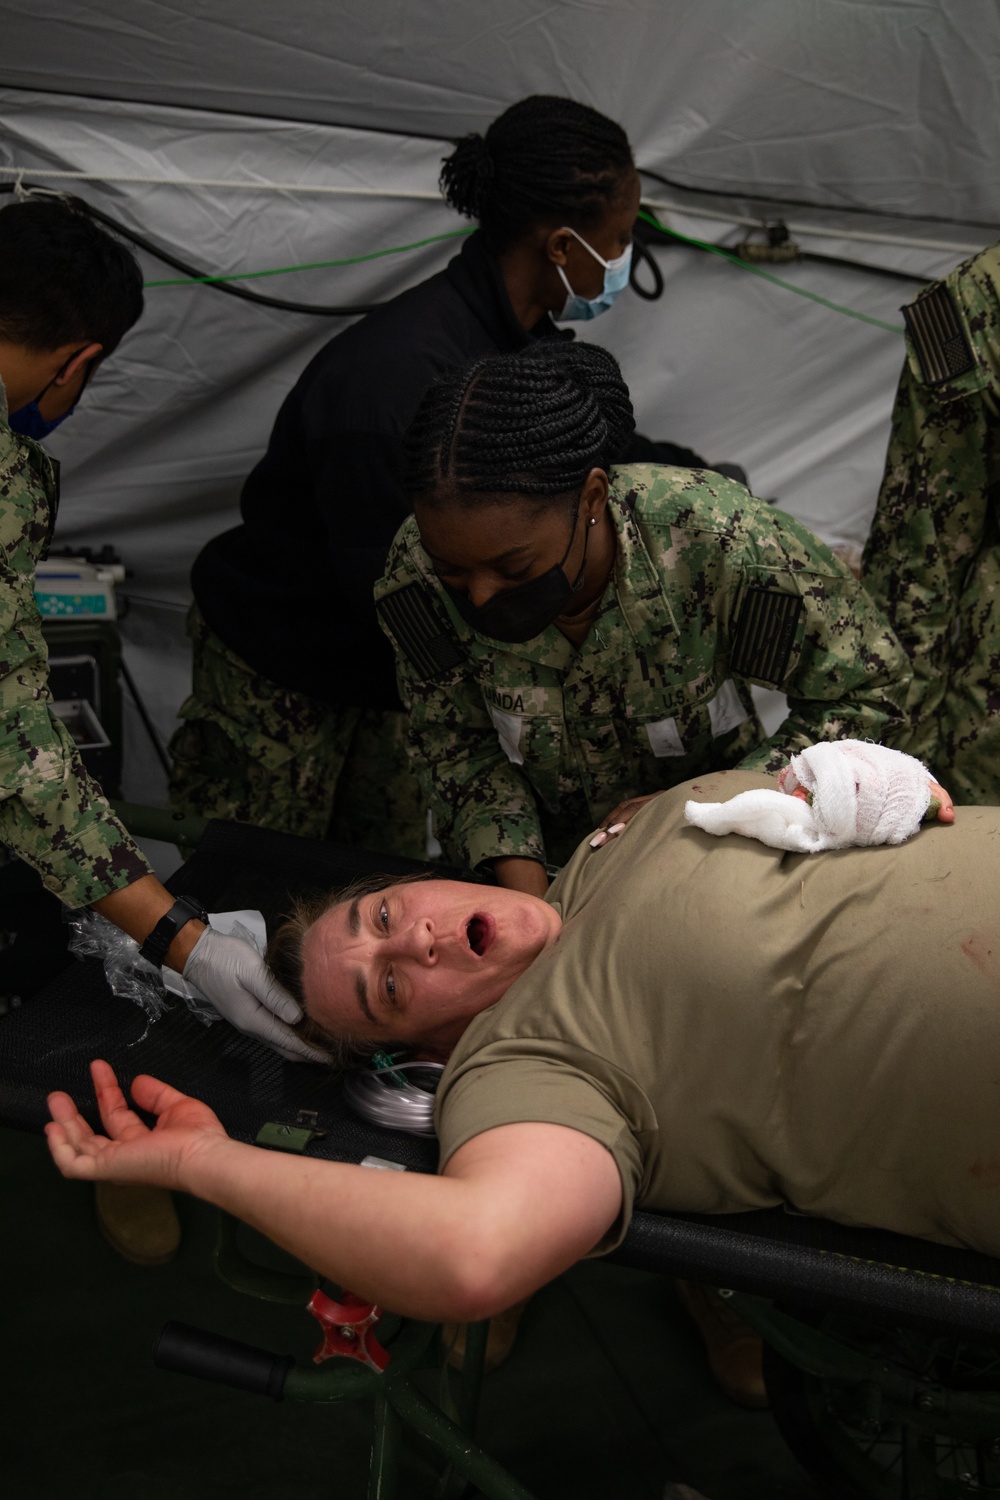 Medical readiness at moulage warehouse